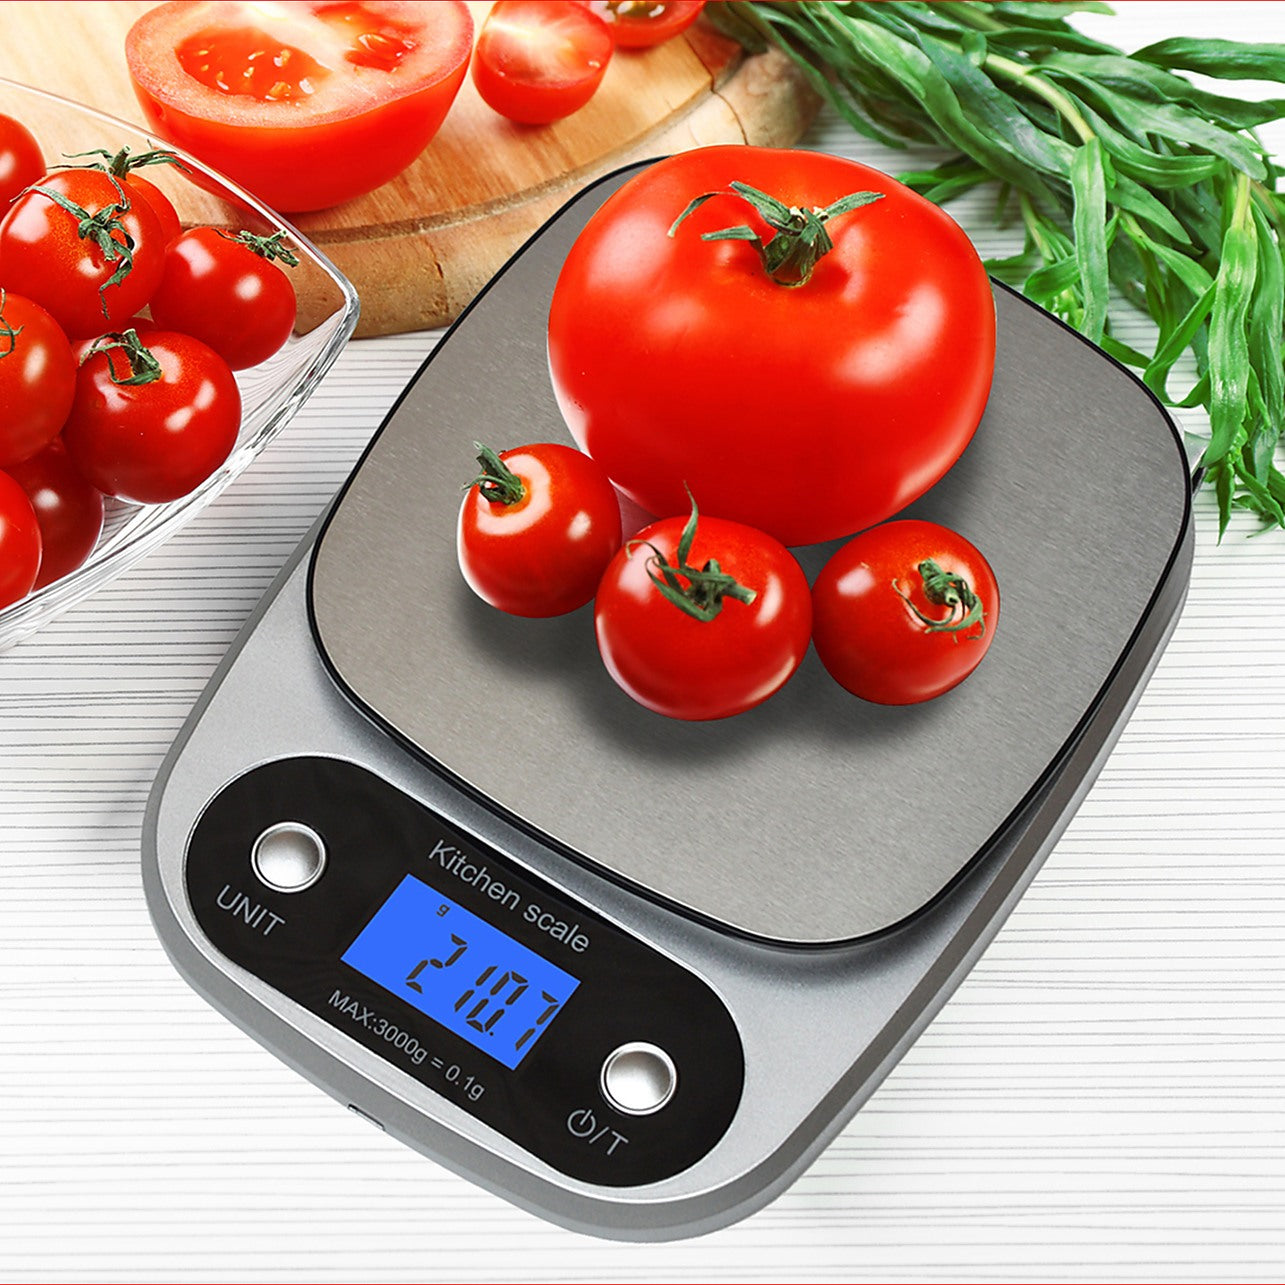 The Prep Container Chef digital kitchen scale multifunction nutrition food  scale. easy to clean, precision measuring